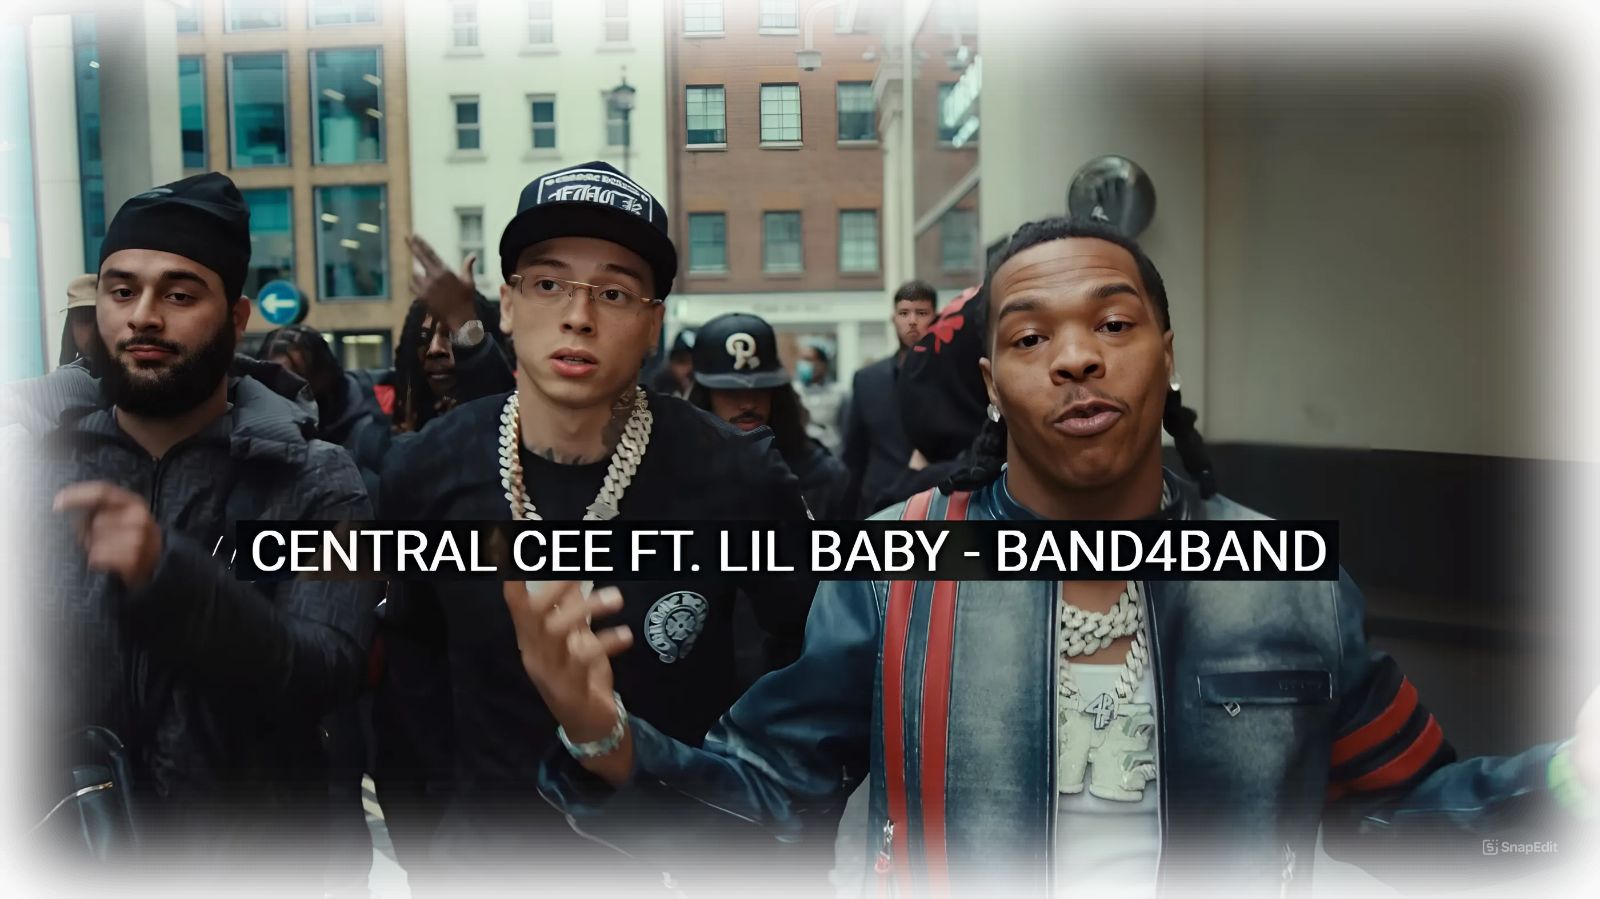 central-cee-ft-lil-baby-band4band-perevod-teksta-pesni-na-russkij-yazyk